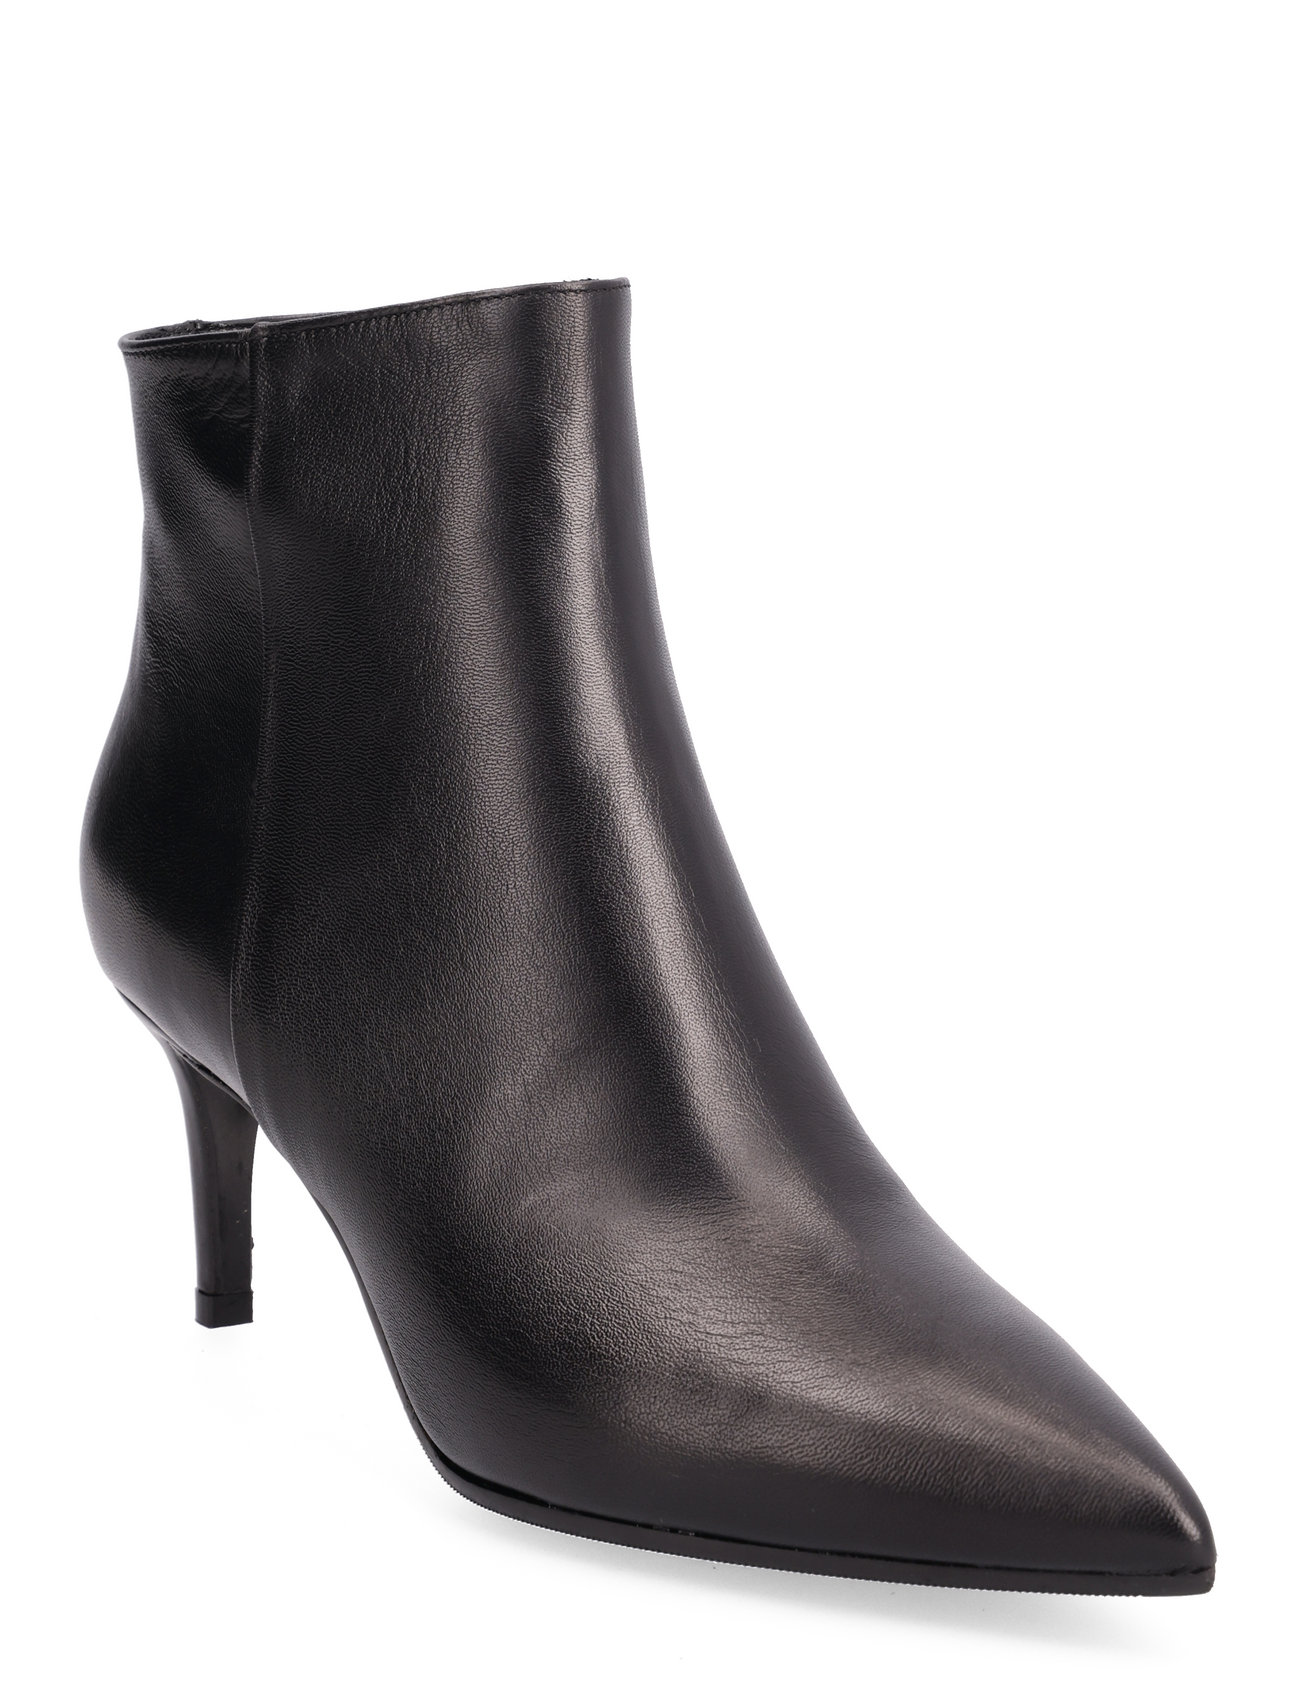 Apair Low Classic Stilletto Bootie - Heeled ankle boots - Boozt.com